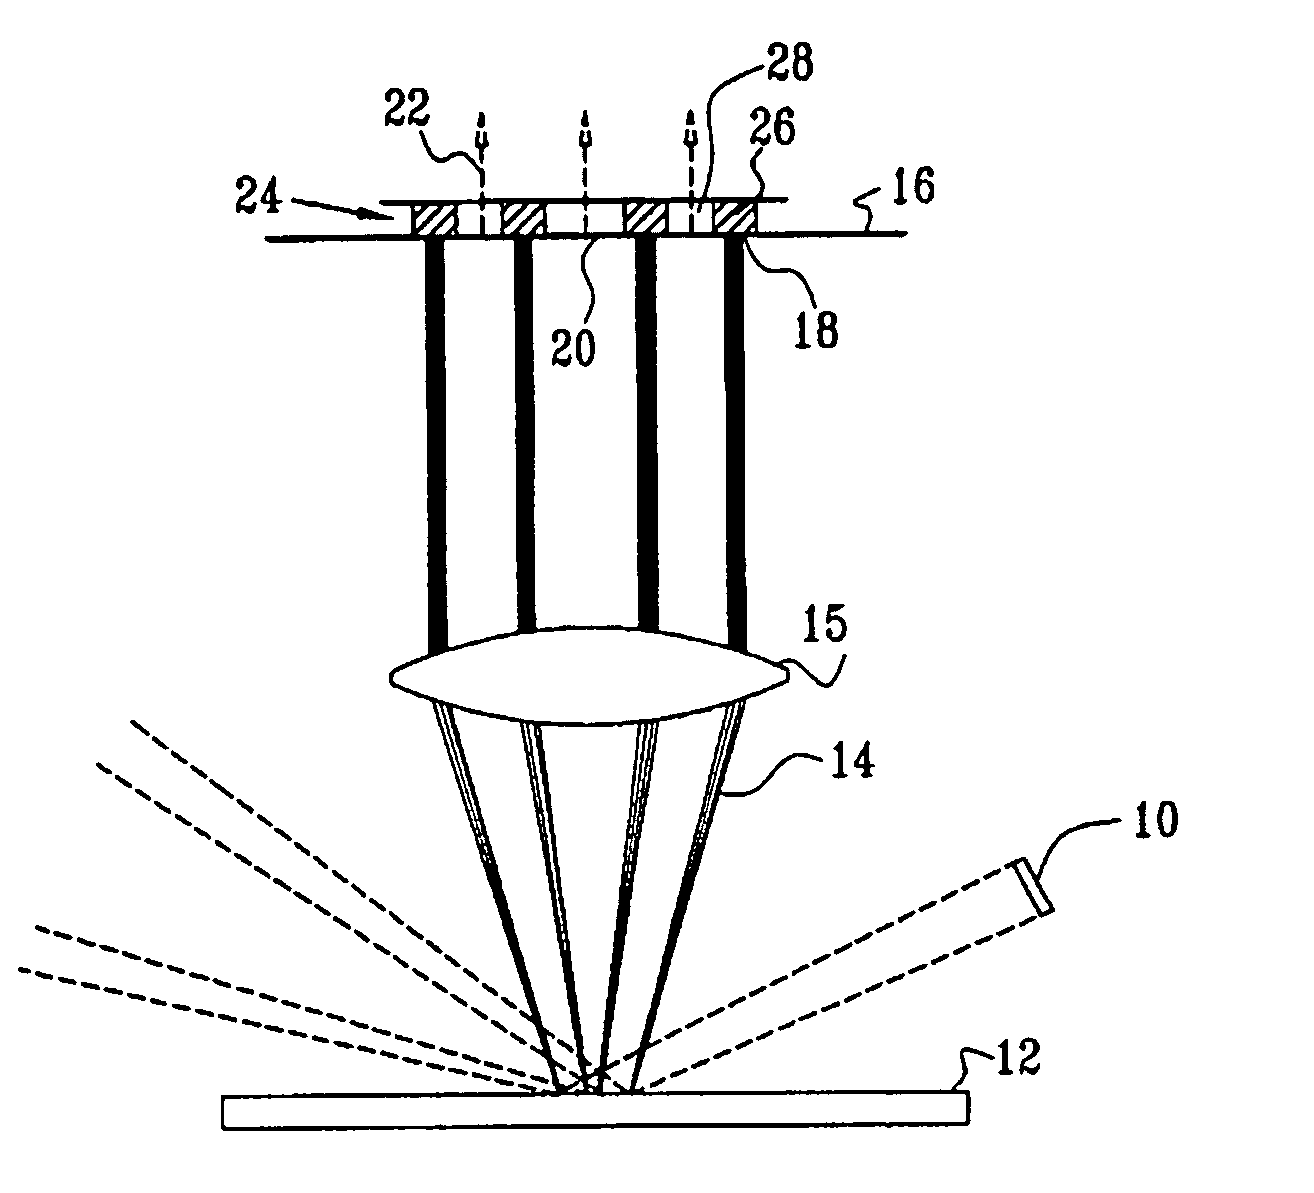 Programmable spatial filter for wafer inspection